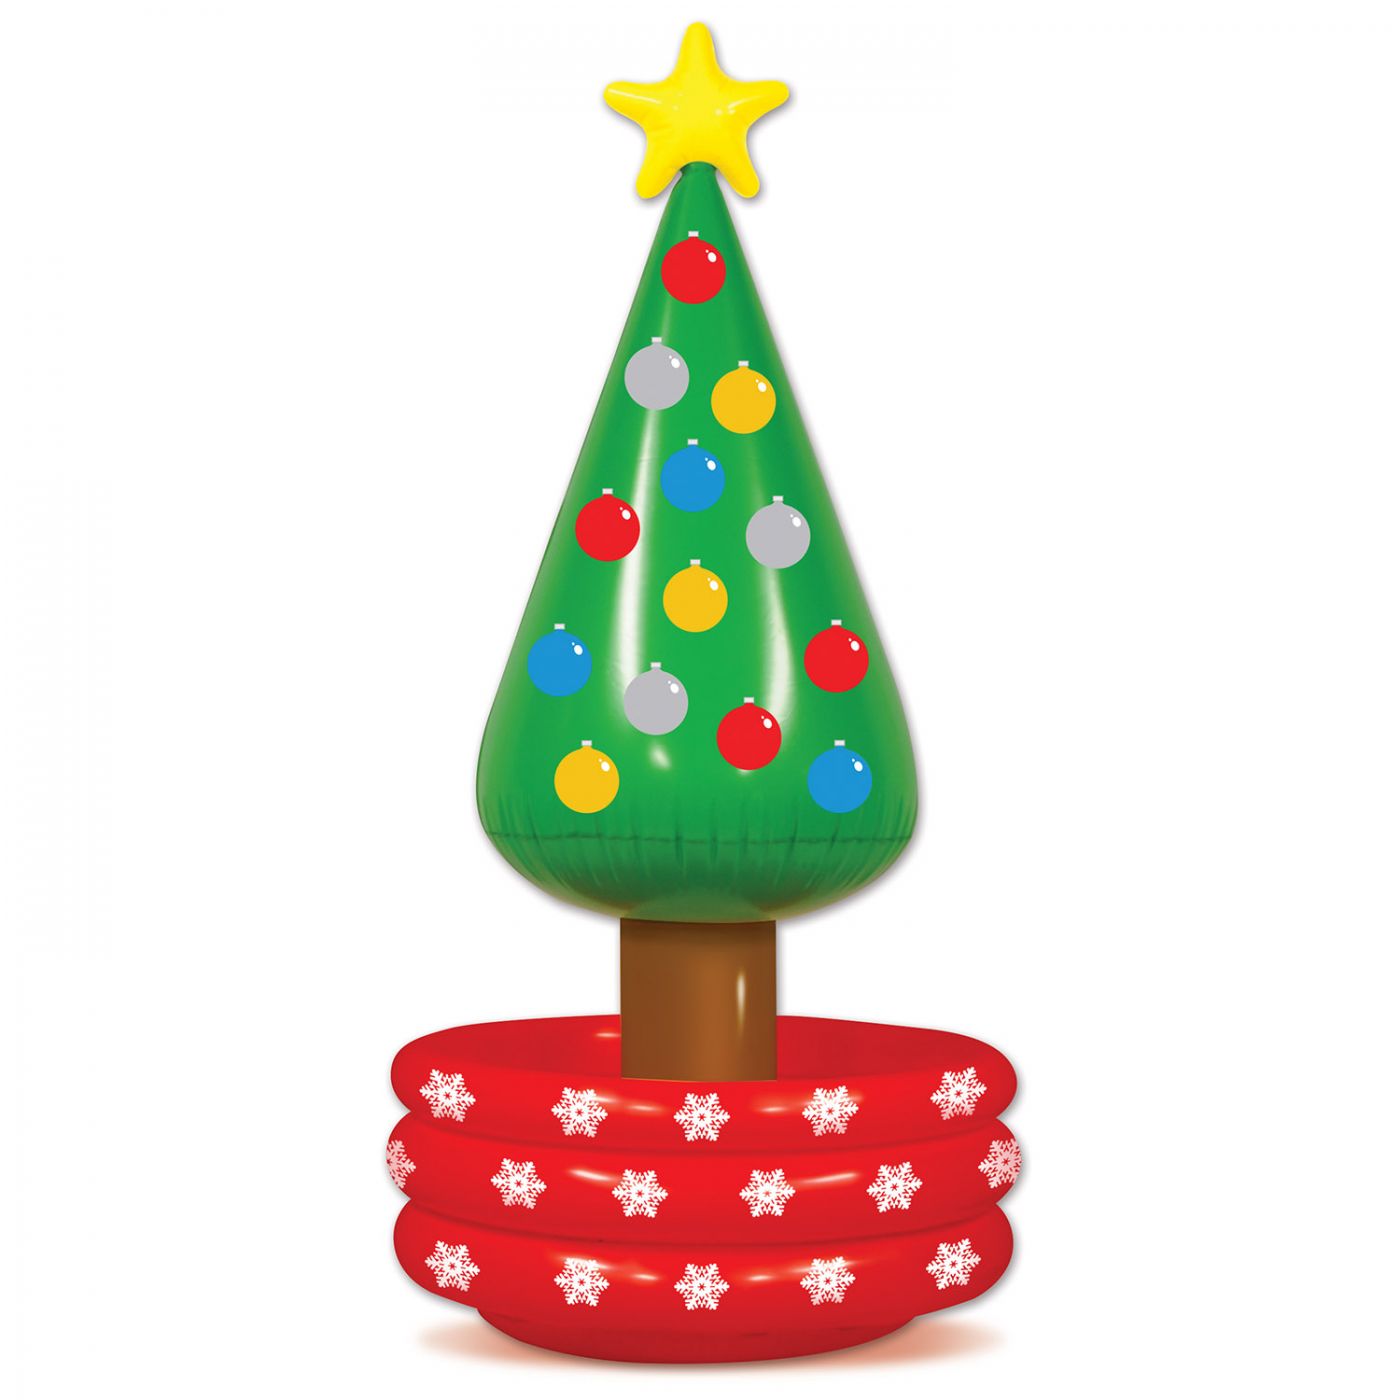 Inflatable Christmas Tree Cooler (6) image